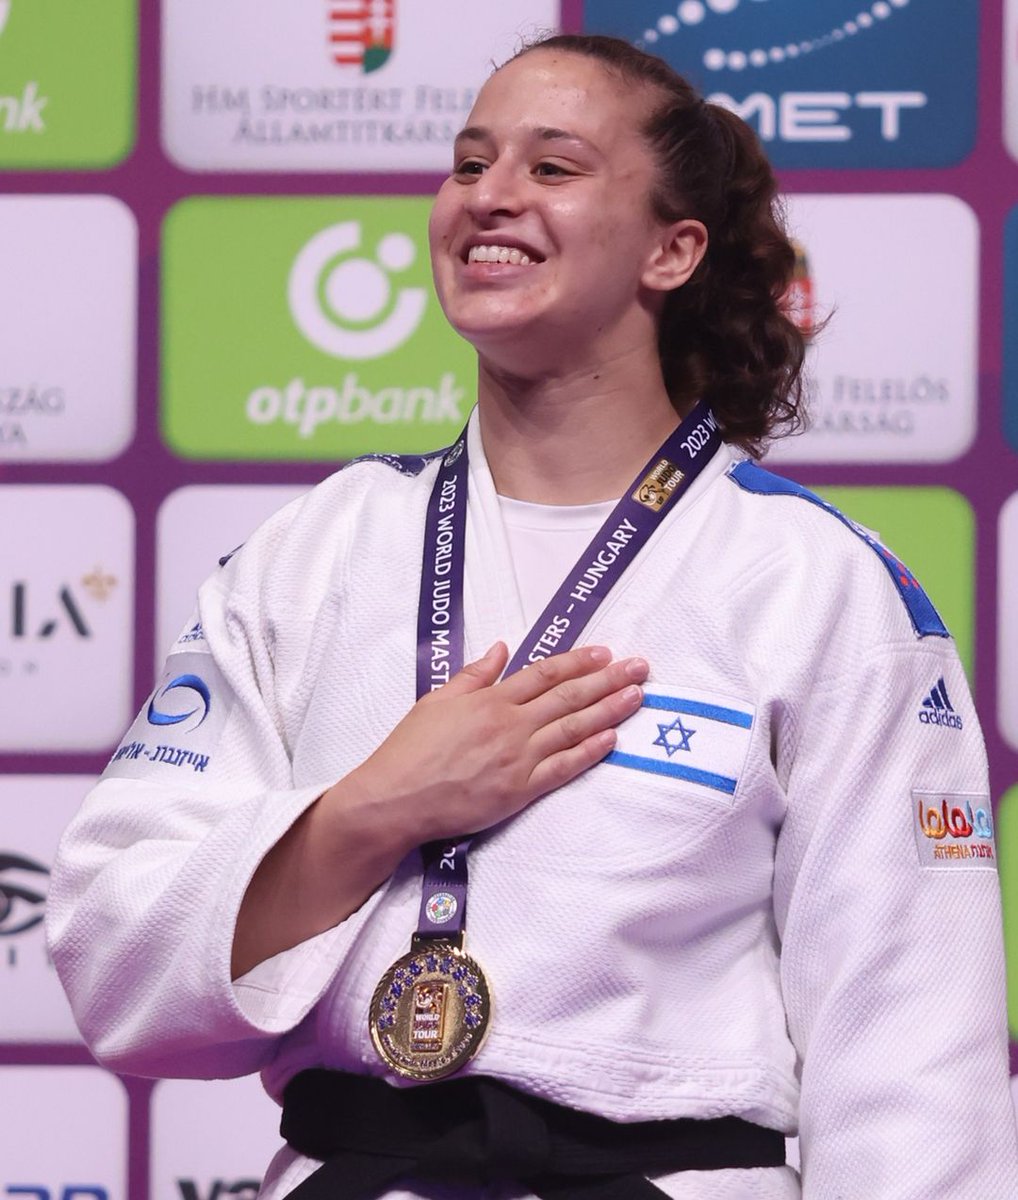 Congratulations to Israeli judoka Inbar Lanir, who won the gold medal at the Hungarian Masters 2023 championship in Budapest & became the new world number one ranking in the u78kg category!